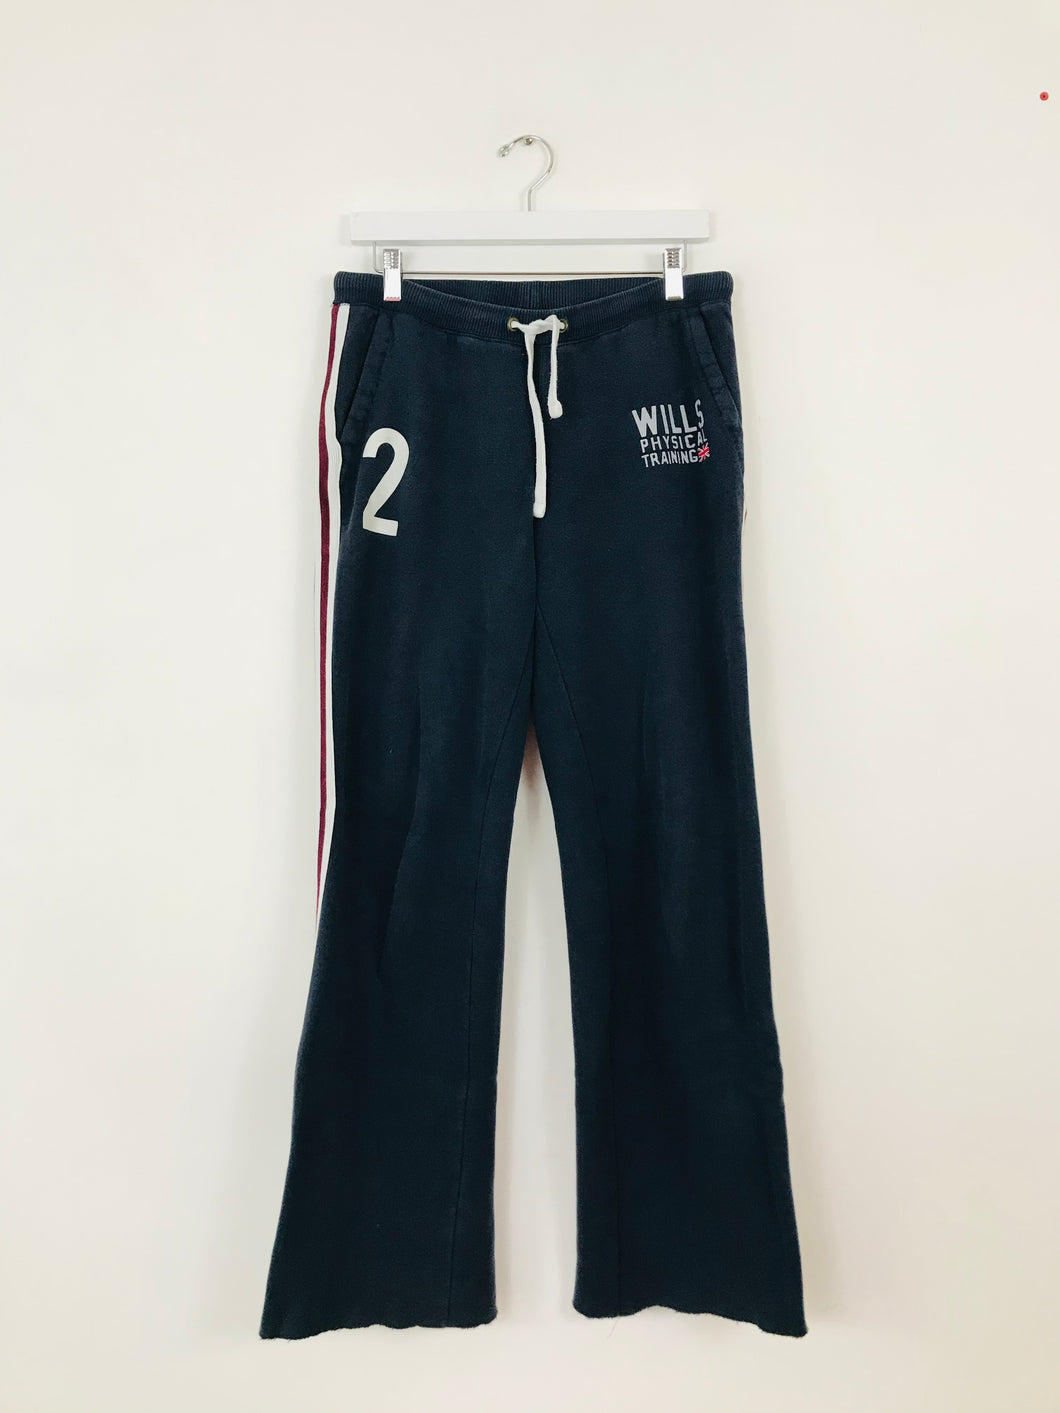 Jack Wills Women’s Joggers Tracksuit Bottoms Trousers | UK12 | Navy Blue